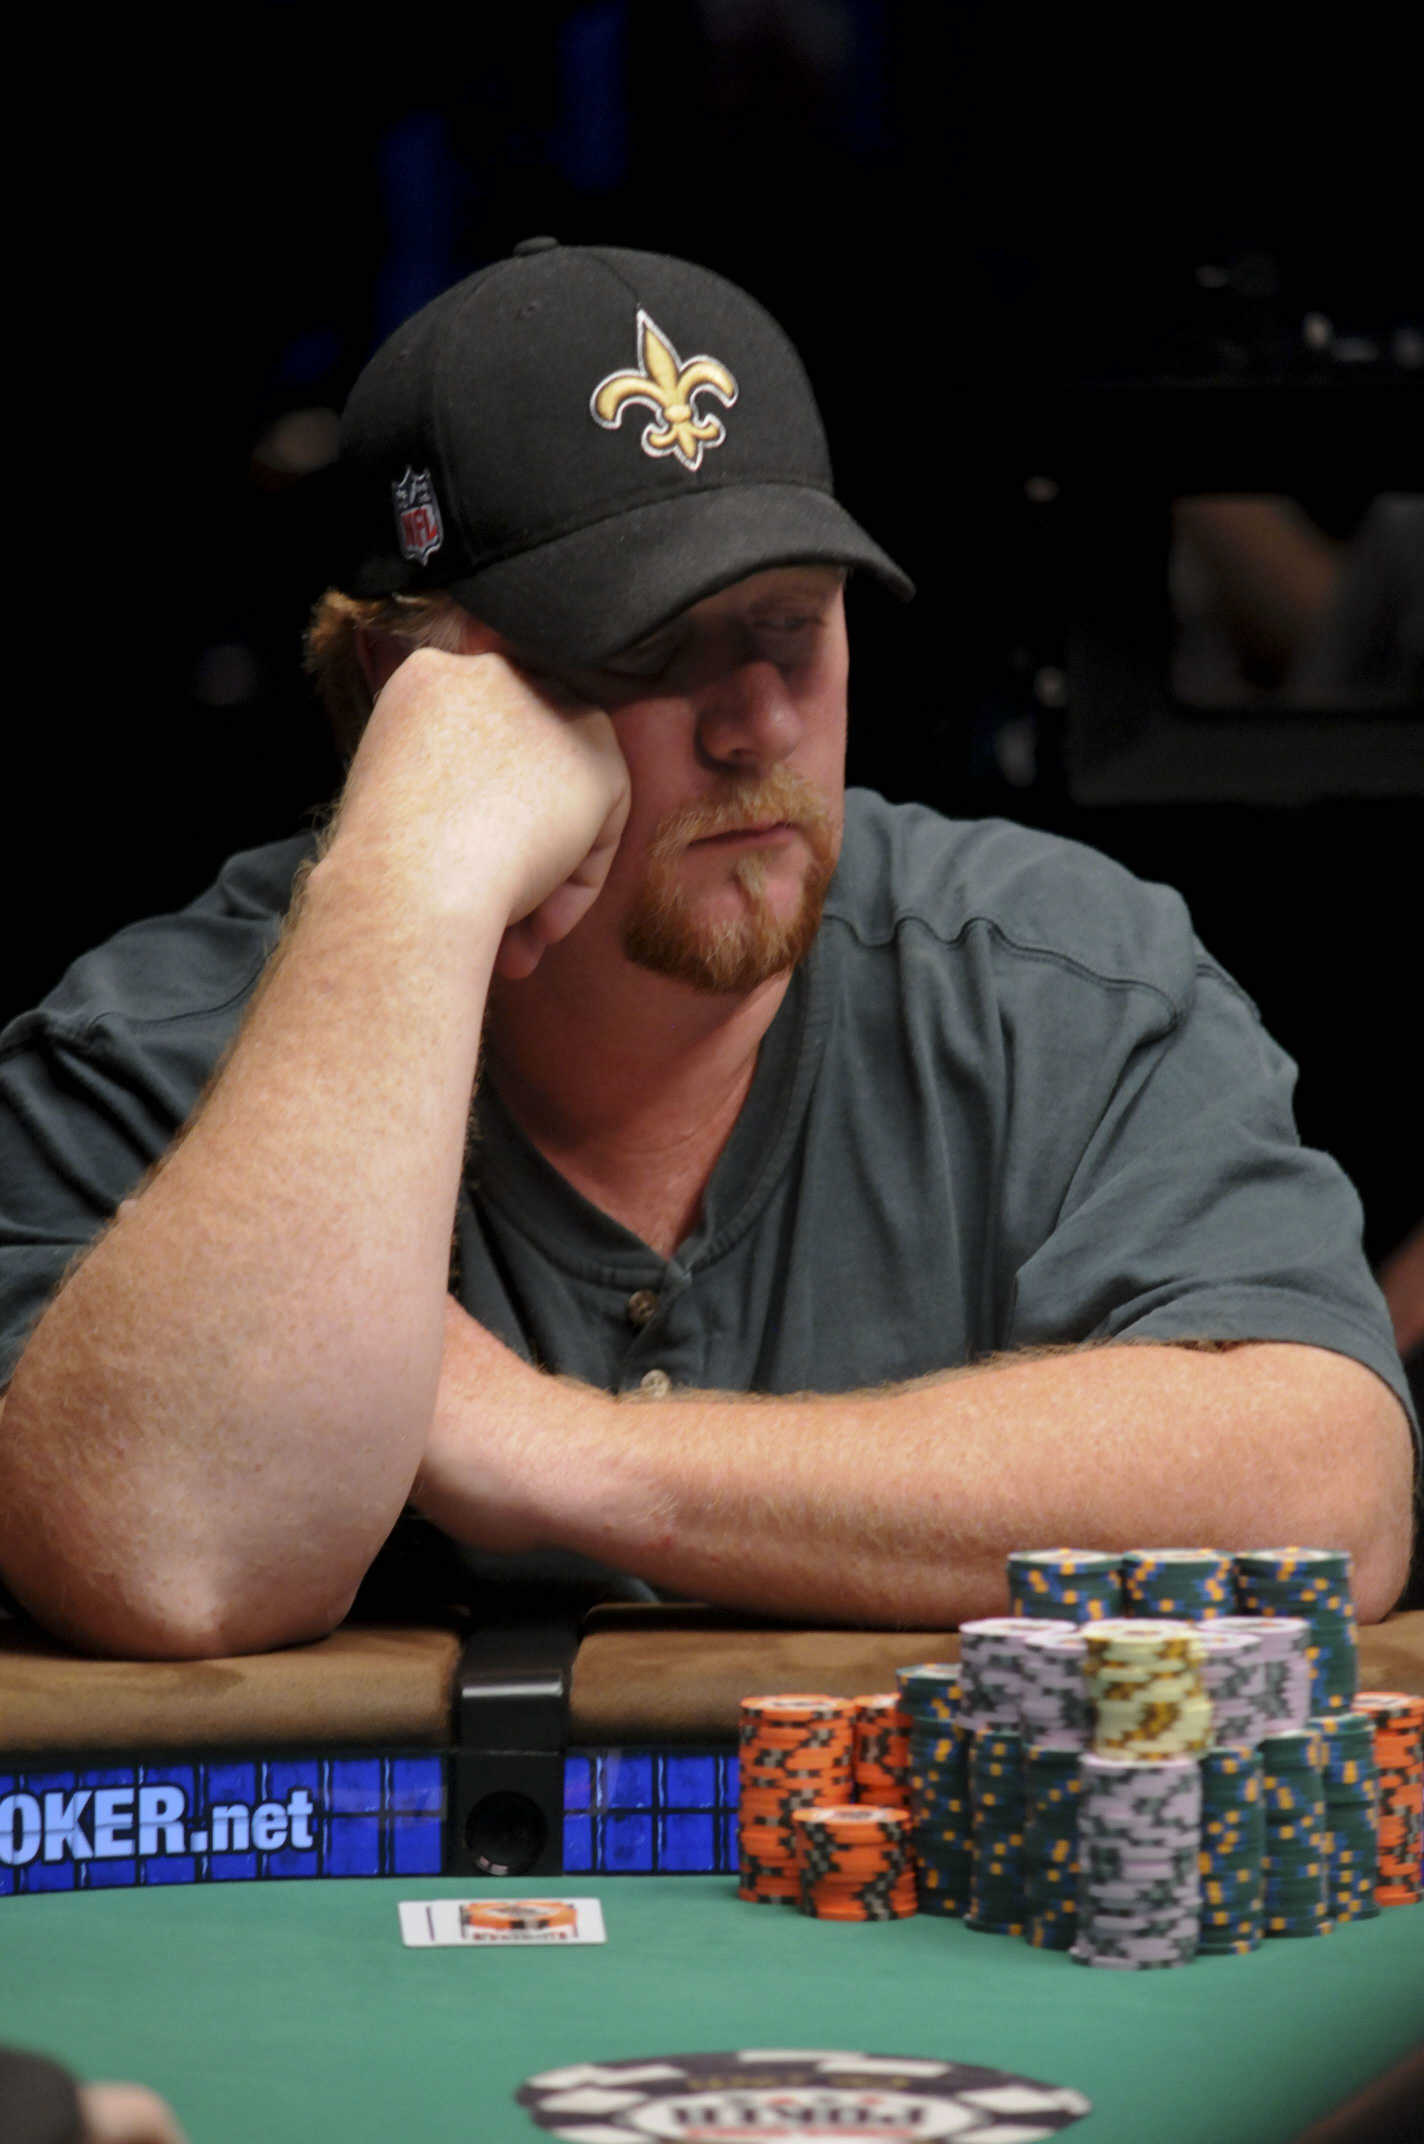 Day 7 Chip Leader Darvin Moon